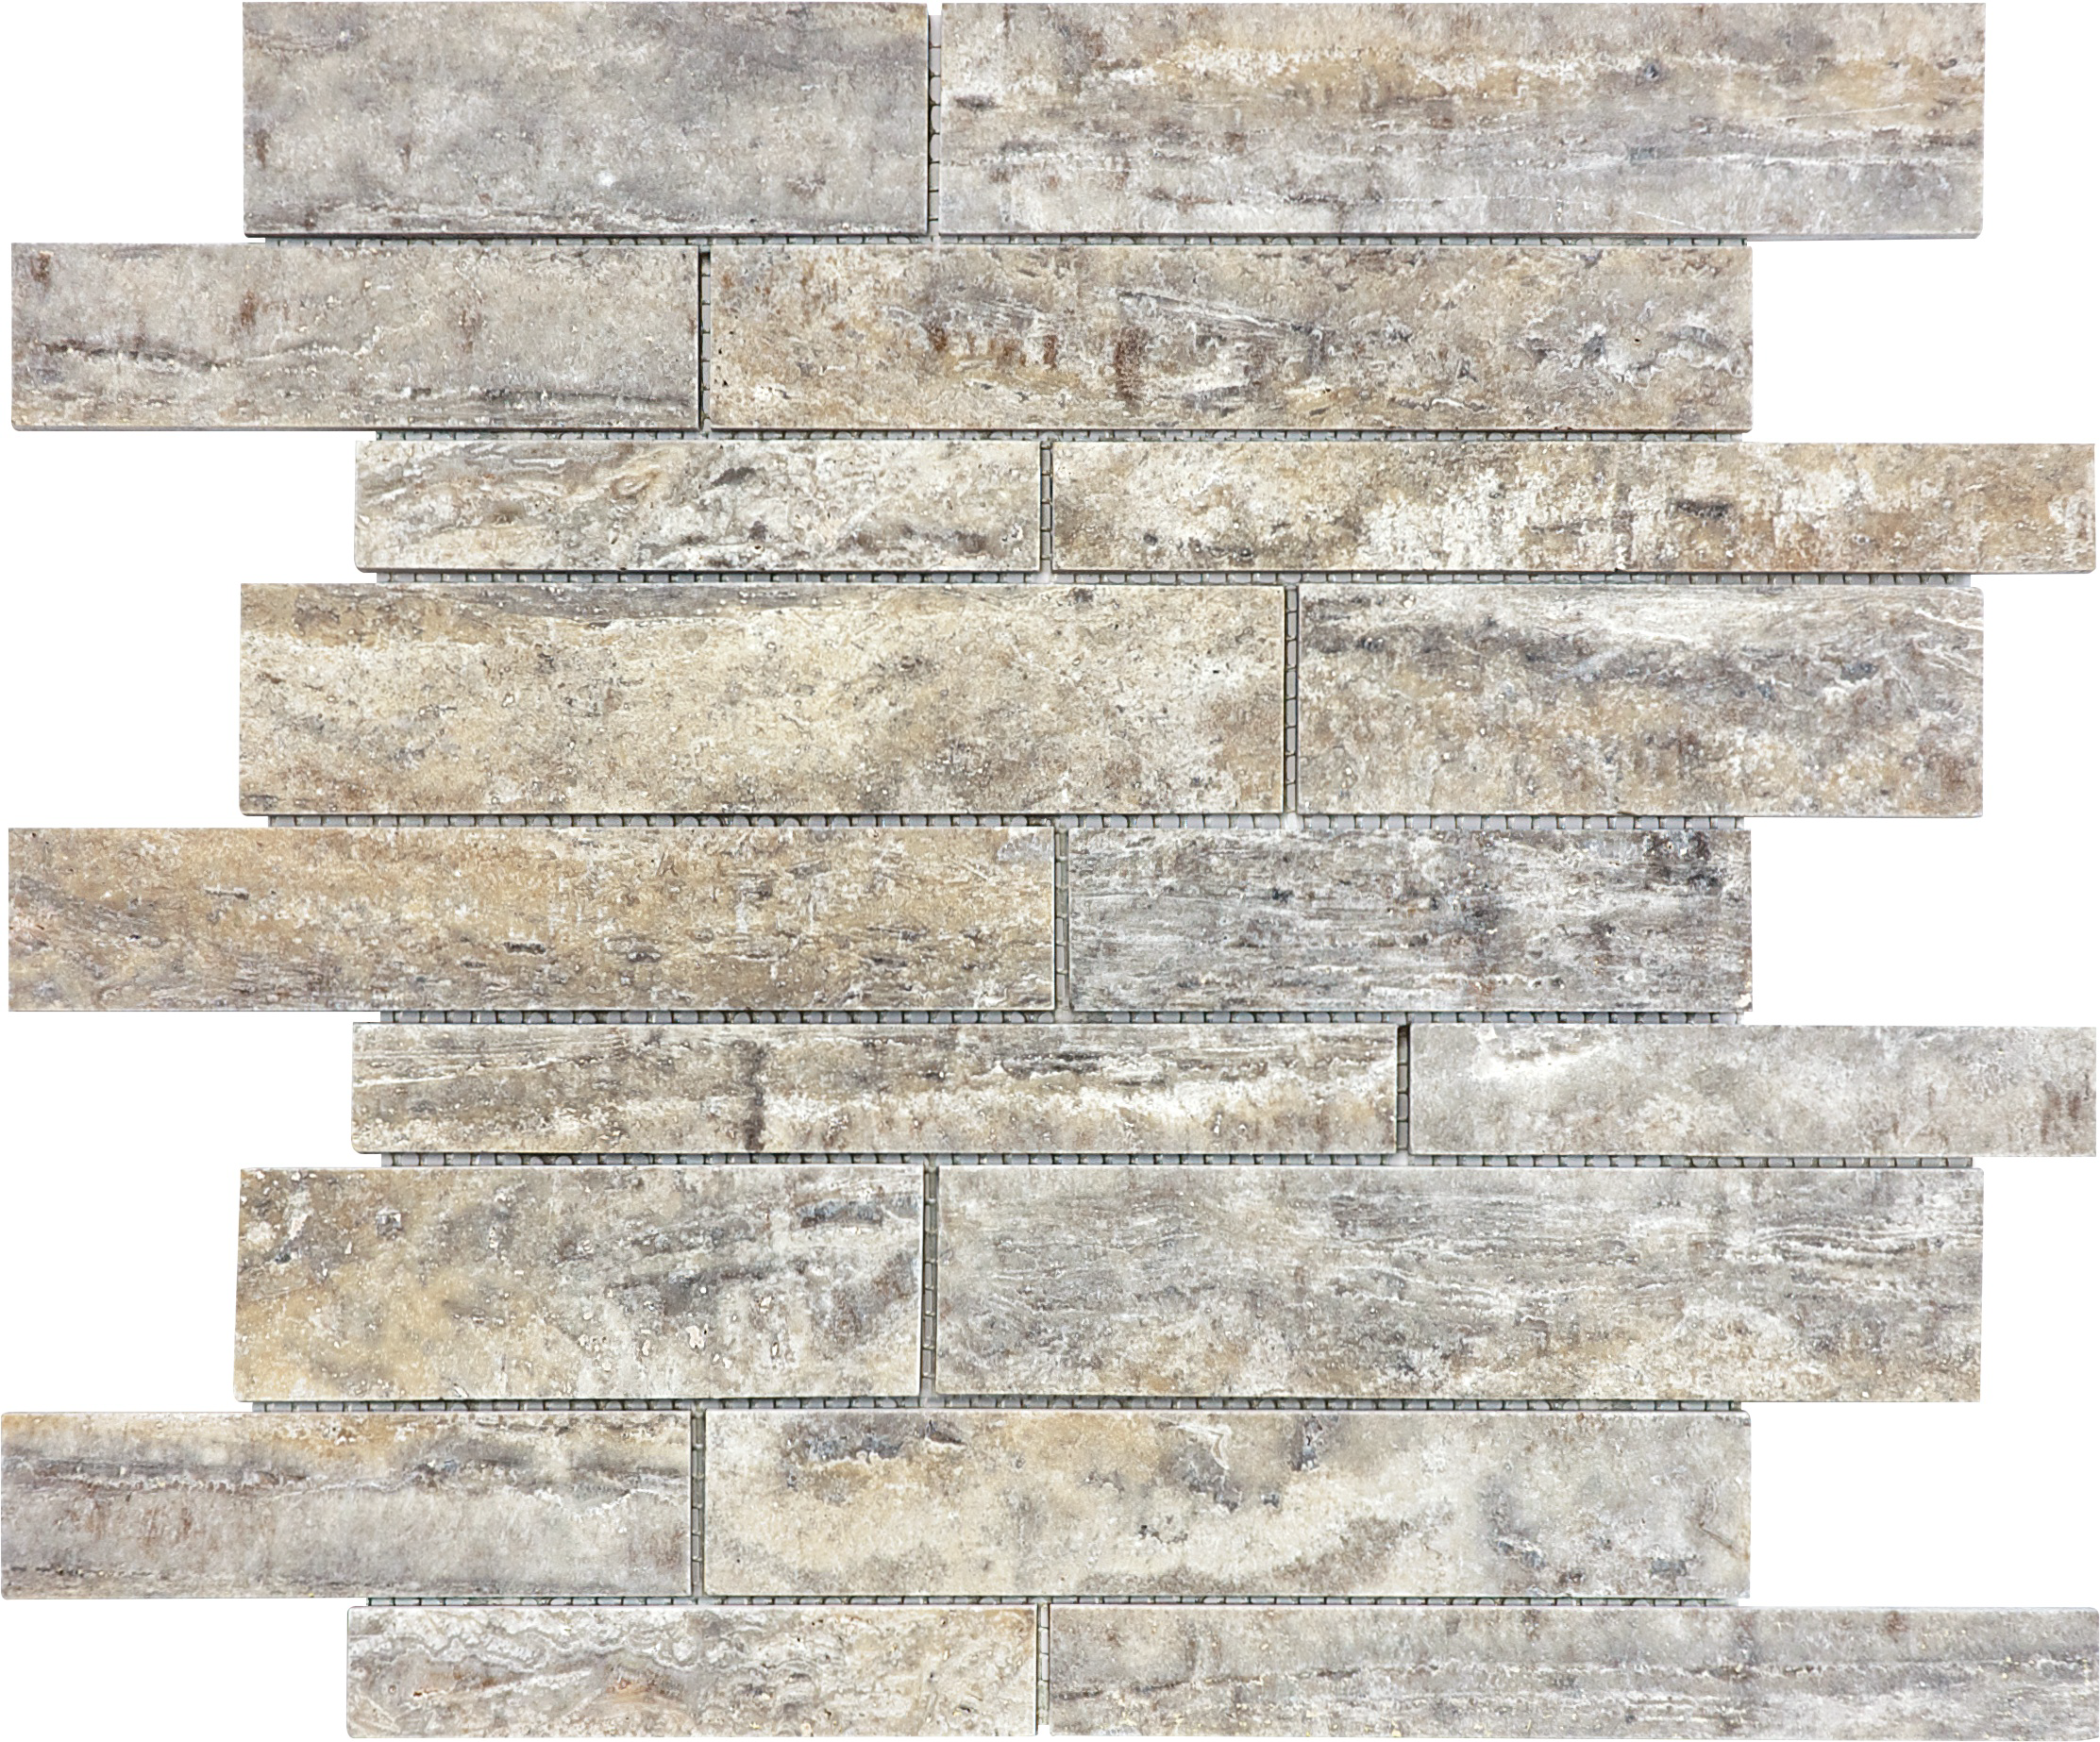 travertine veincut random strip pattern natural stone mosaic from silver ash anatolia collection distributed by surface group international honed finish straight edge edge mesh shape